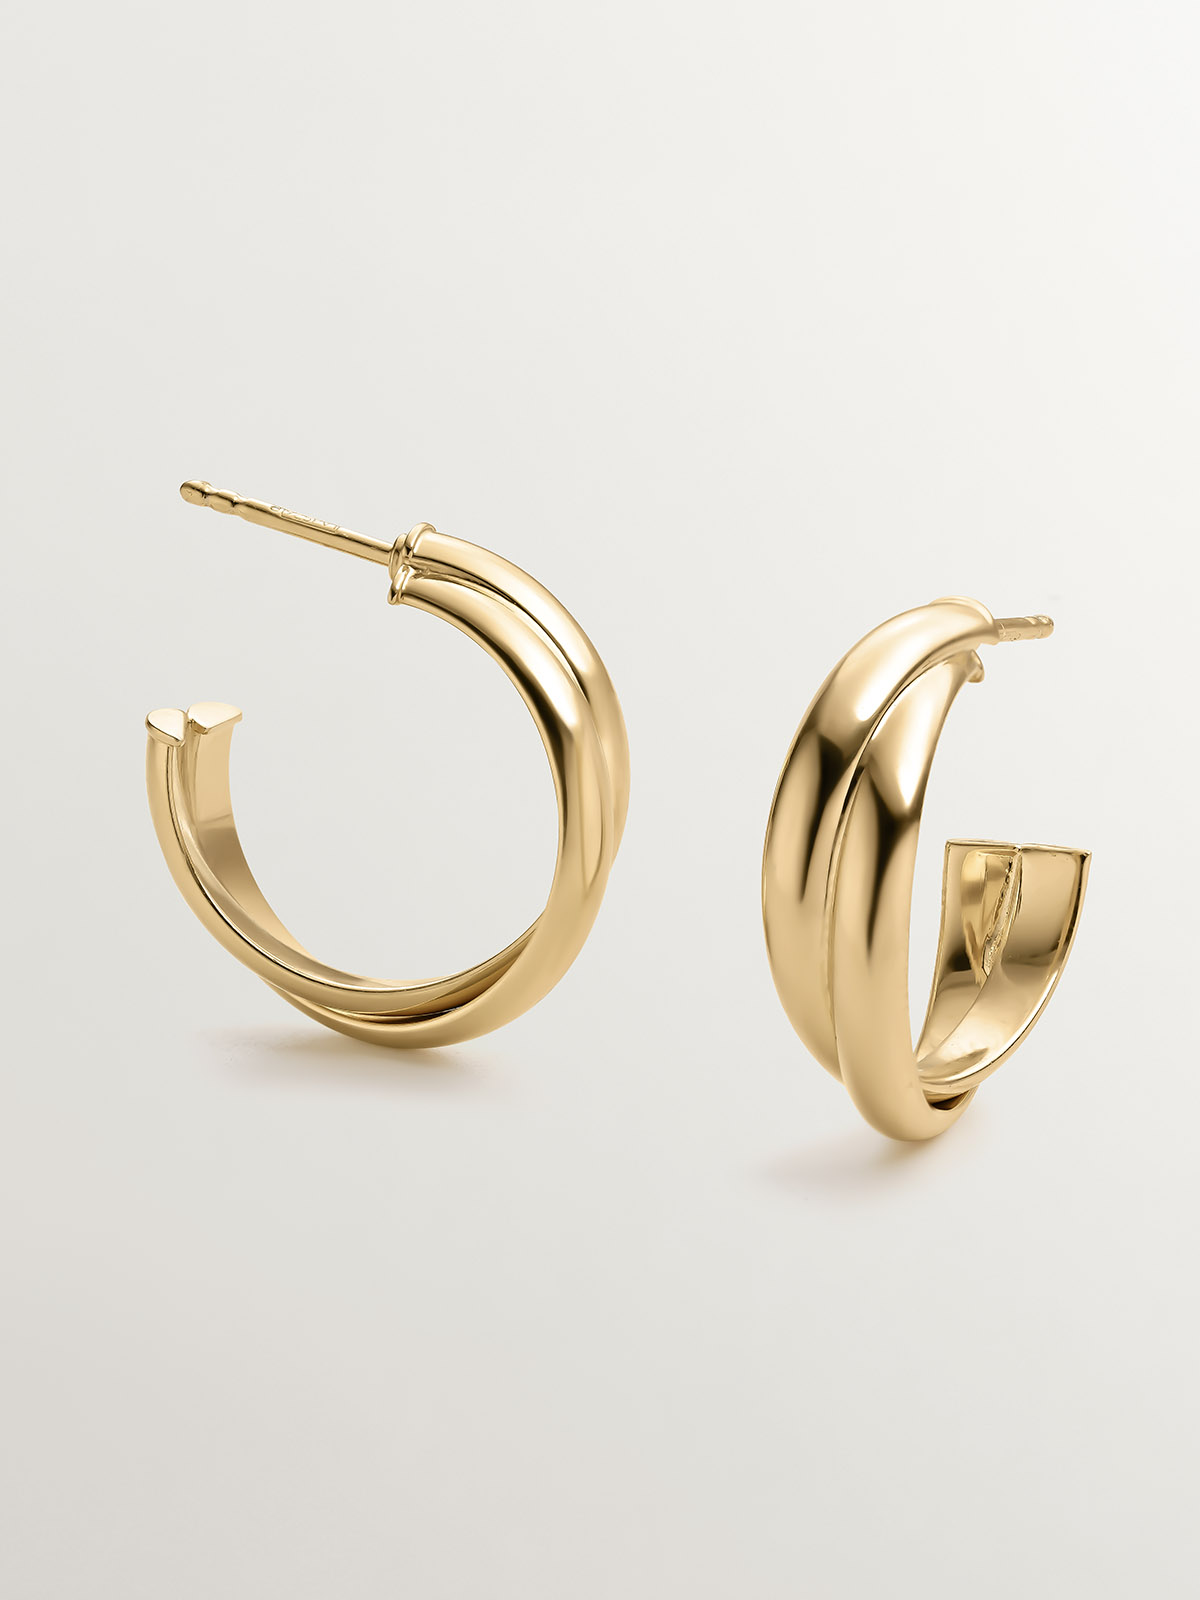 Medium double hoop earrings made of 925 silver coated in 18K yellow gold